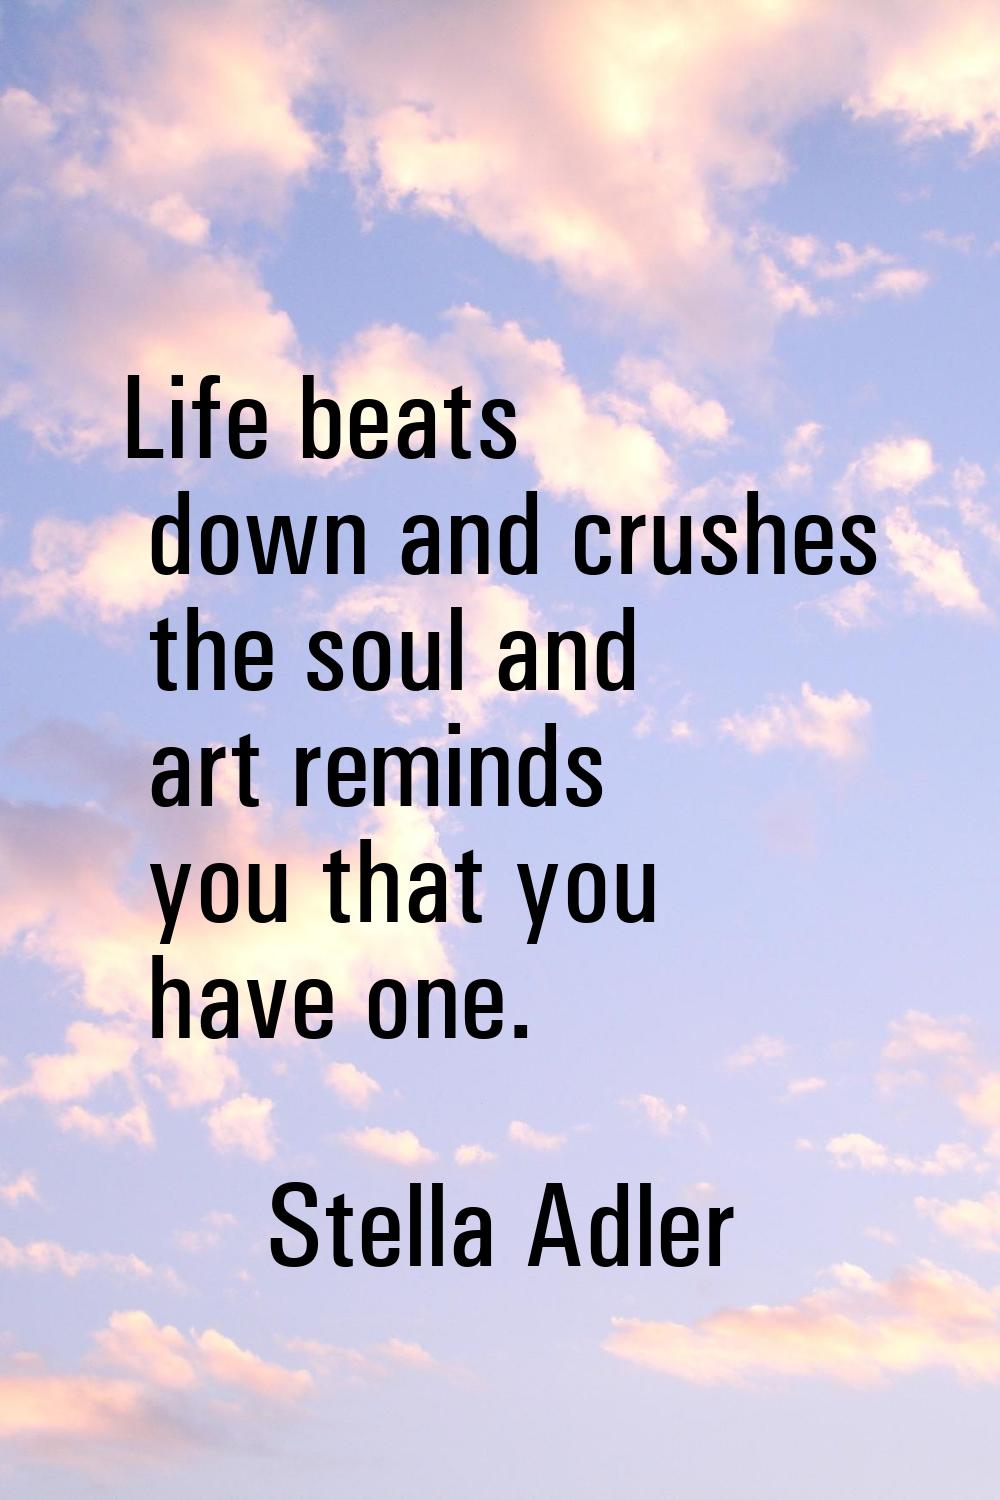 Life beats down and crushes the soul and art reminds you that you have one.